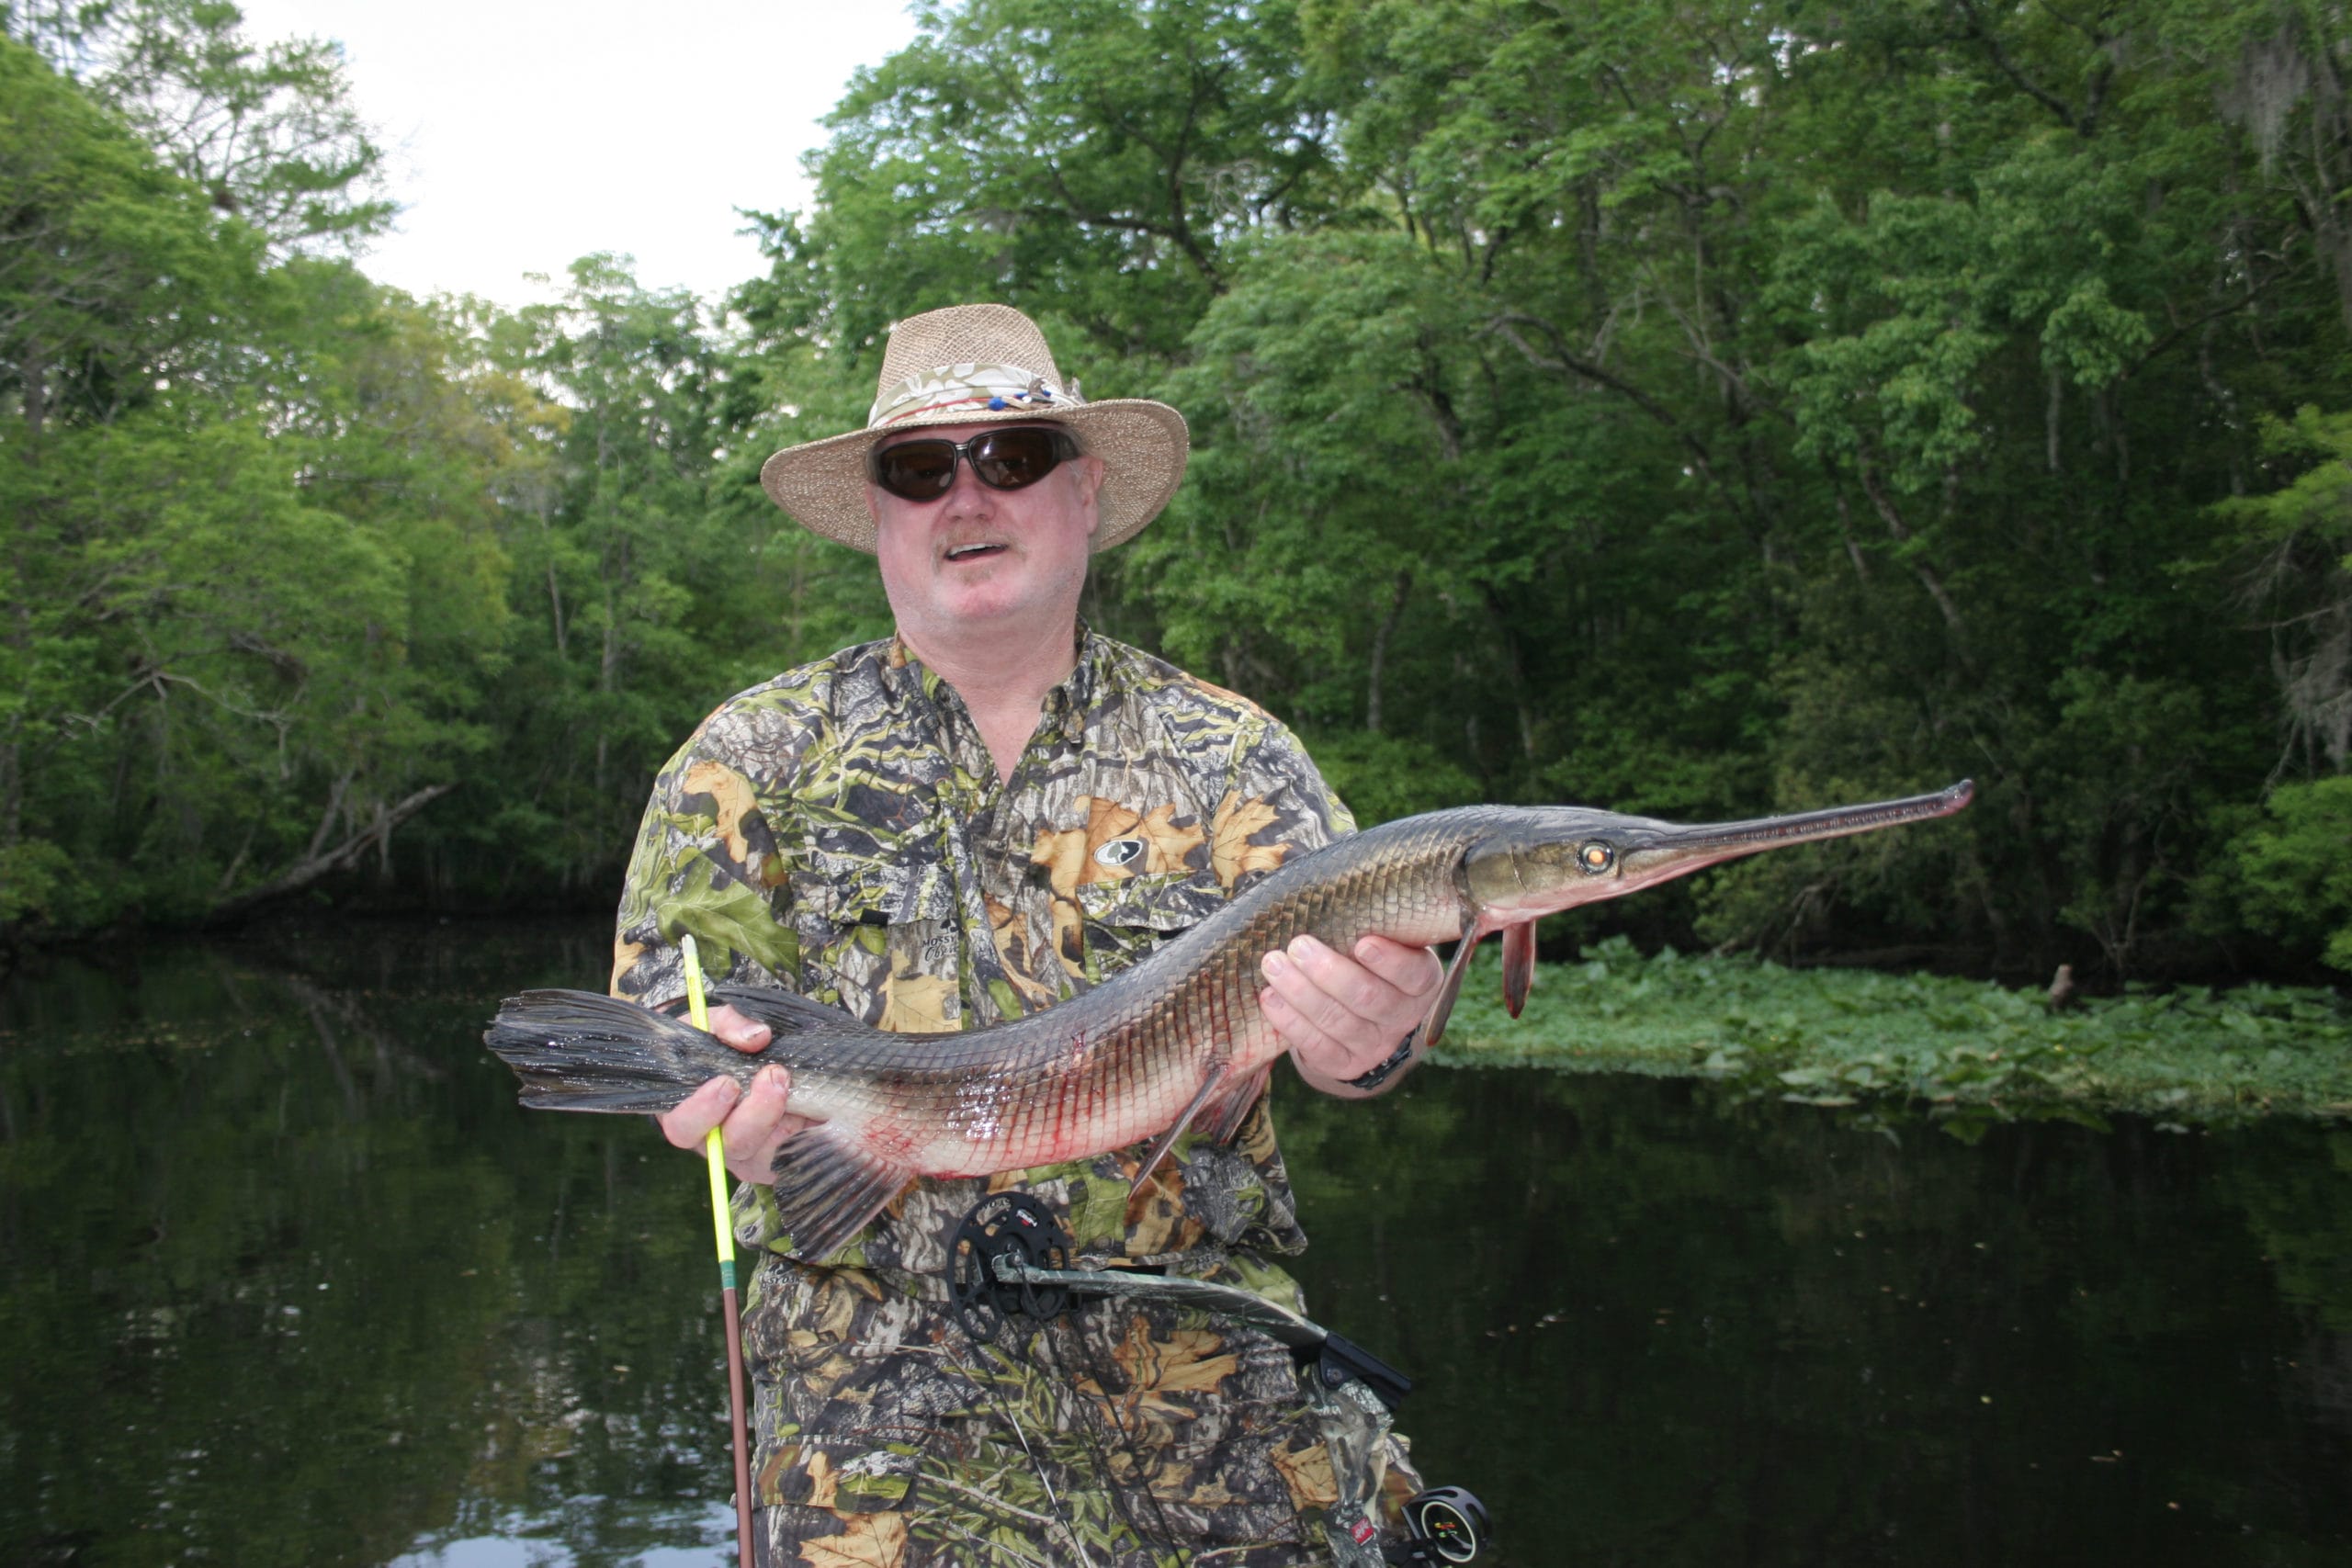 All gar are classed as rough fish. They are among the most popular targets of bowfishermen, especially in the summer when gar are found daylight and dark cruising or loafing in shallow water.